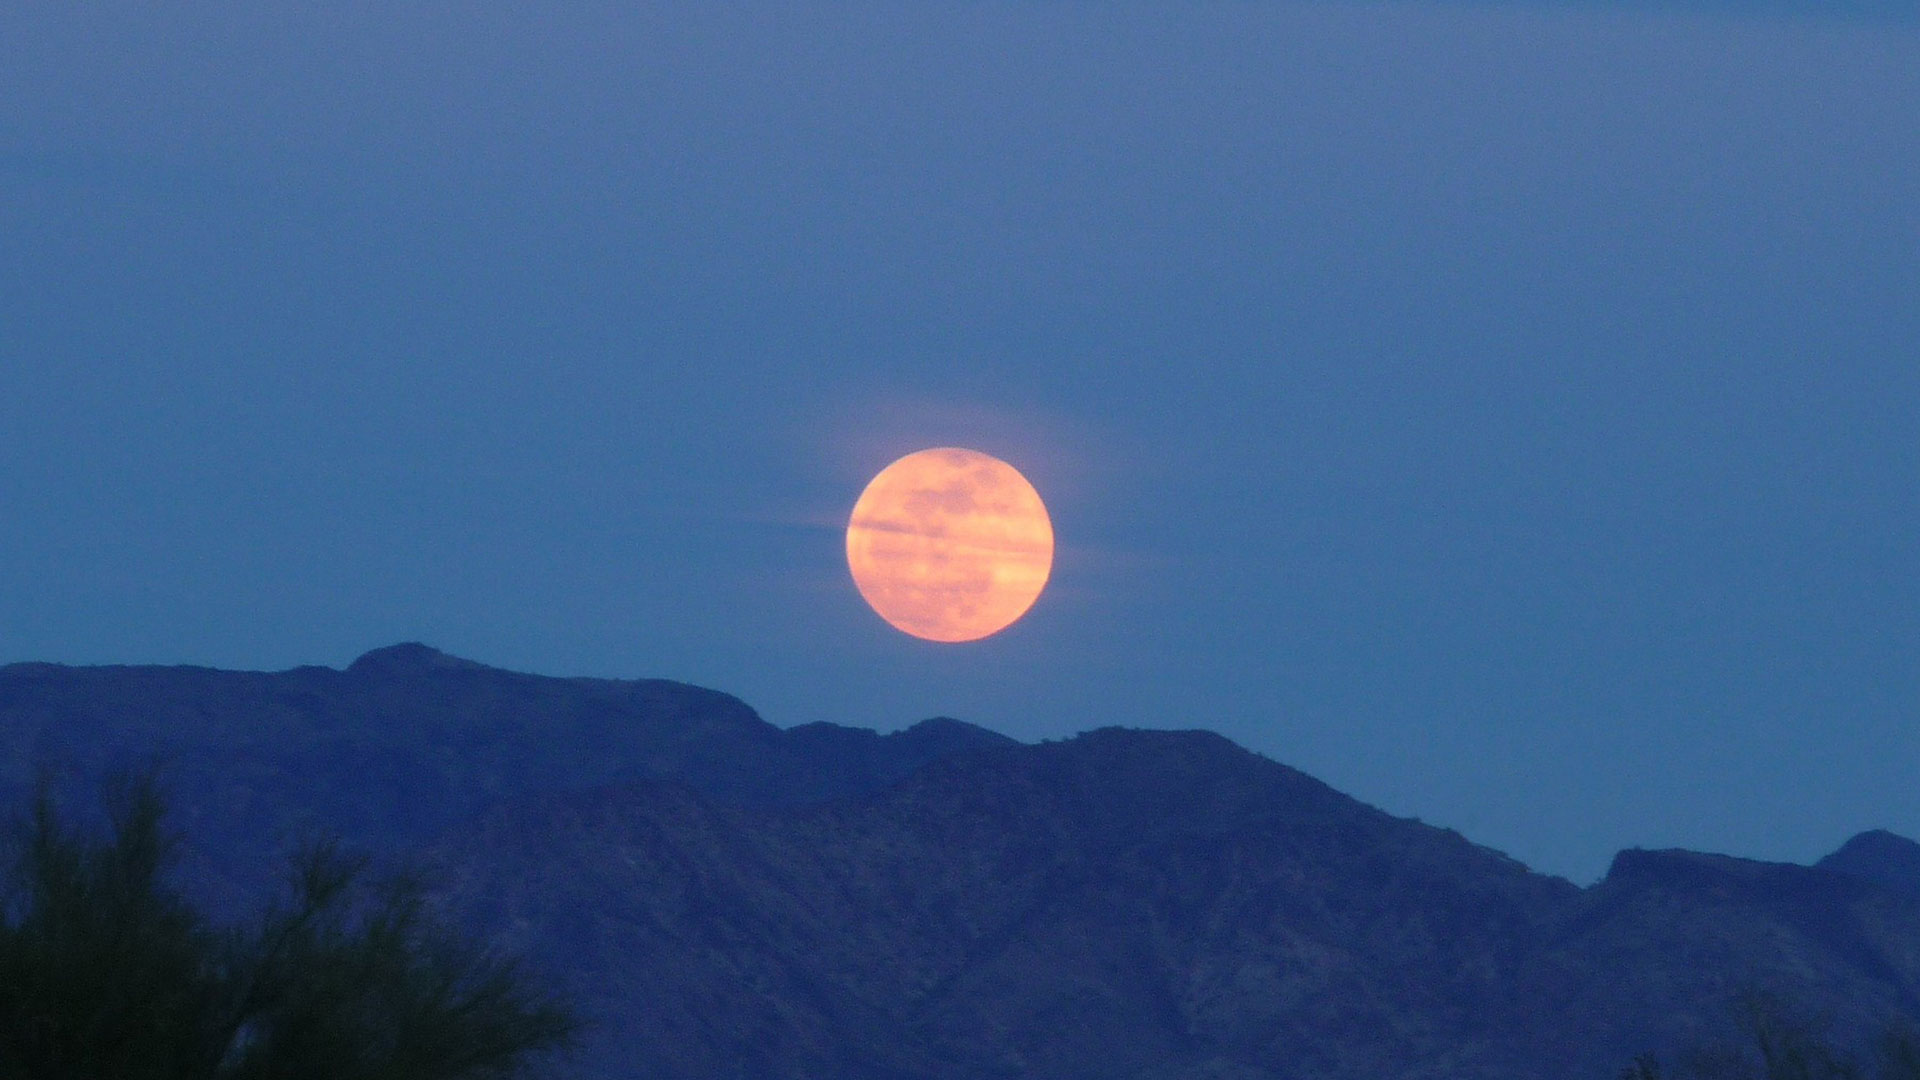 How the Upcoming Harvest Supermoon Might Affect Your Sleep